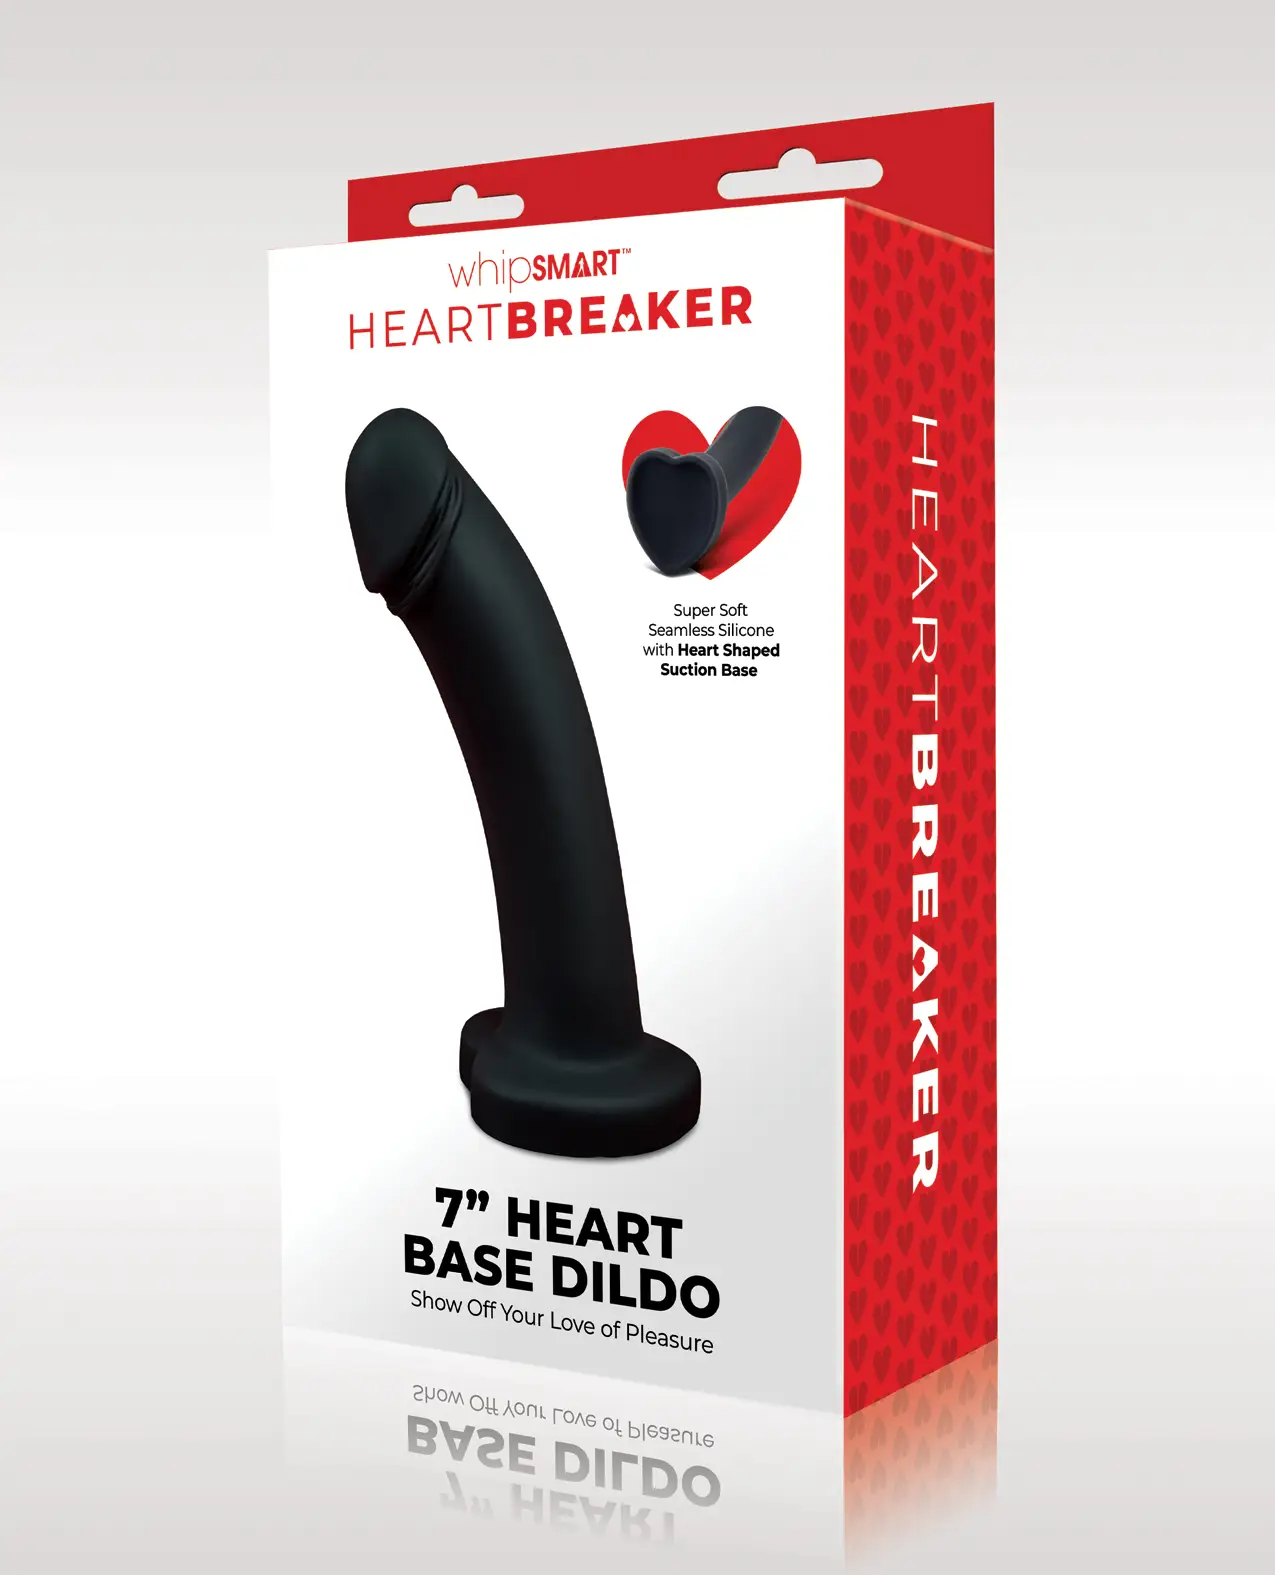 7" Super Soft Seamless Silicone Dildo with a Heart-Shaped Suction Base